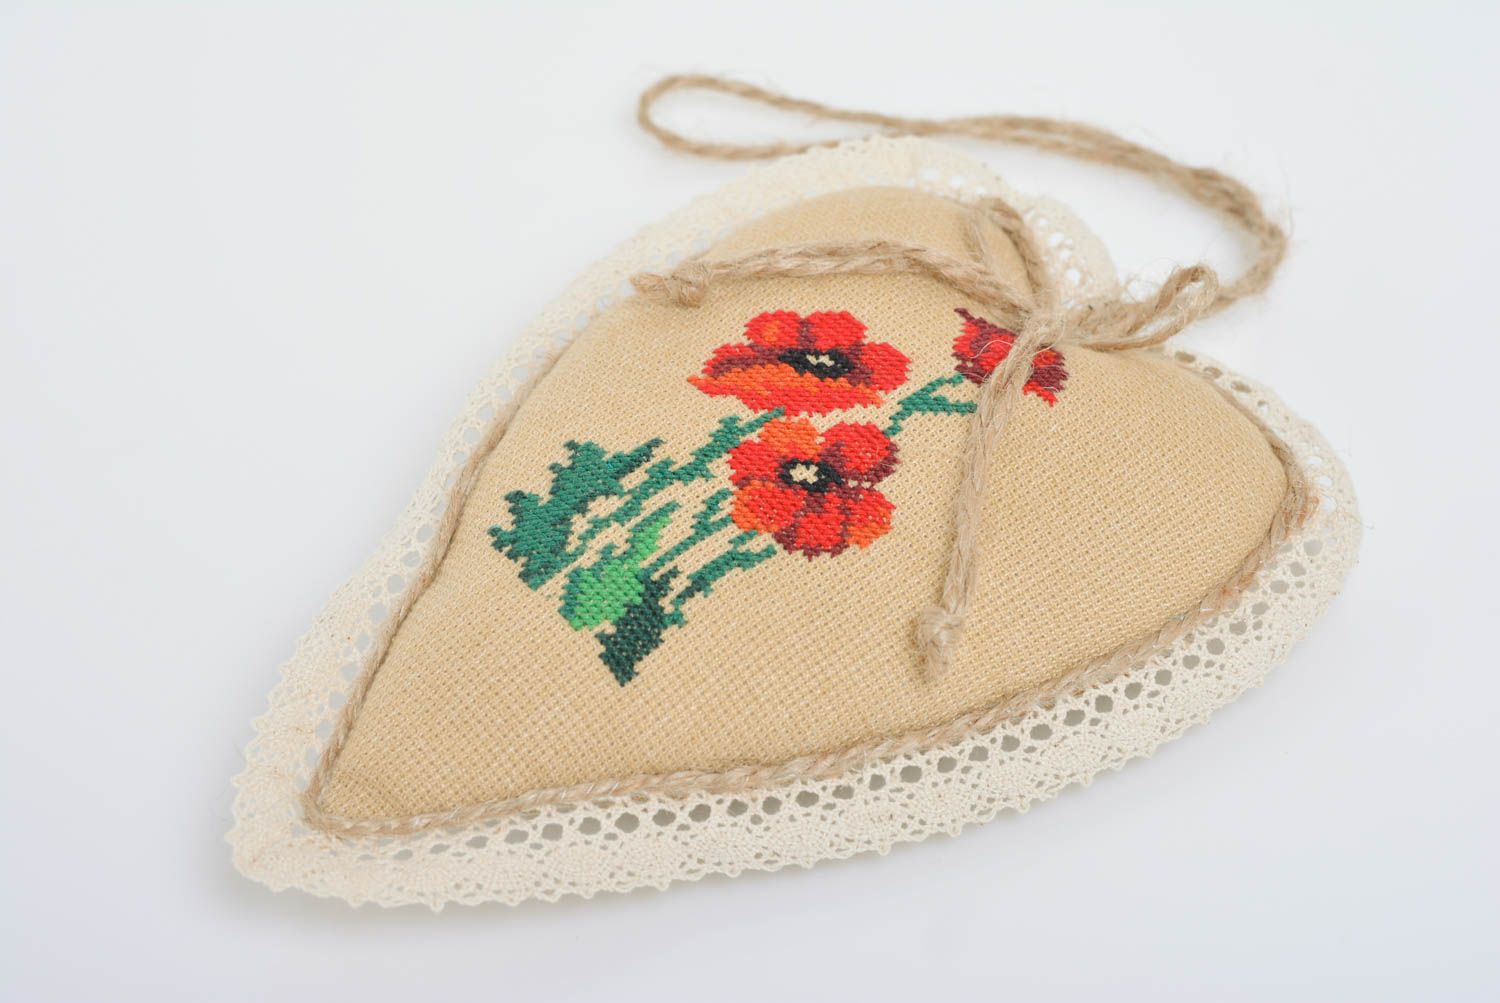 Handmade heart shaped decorative soft fabric wall hanging with embroidery Poppy photo 1